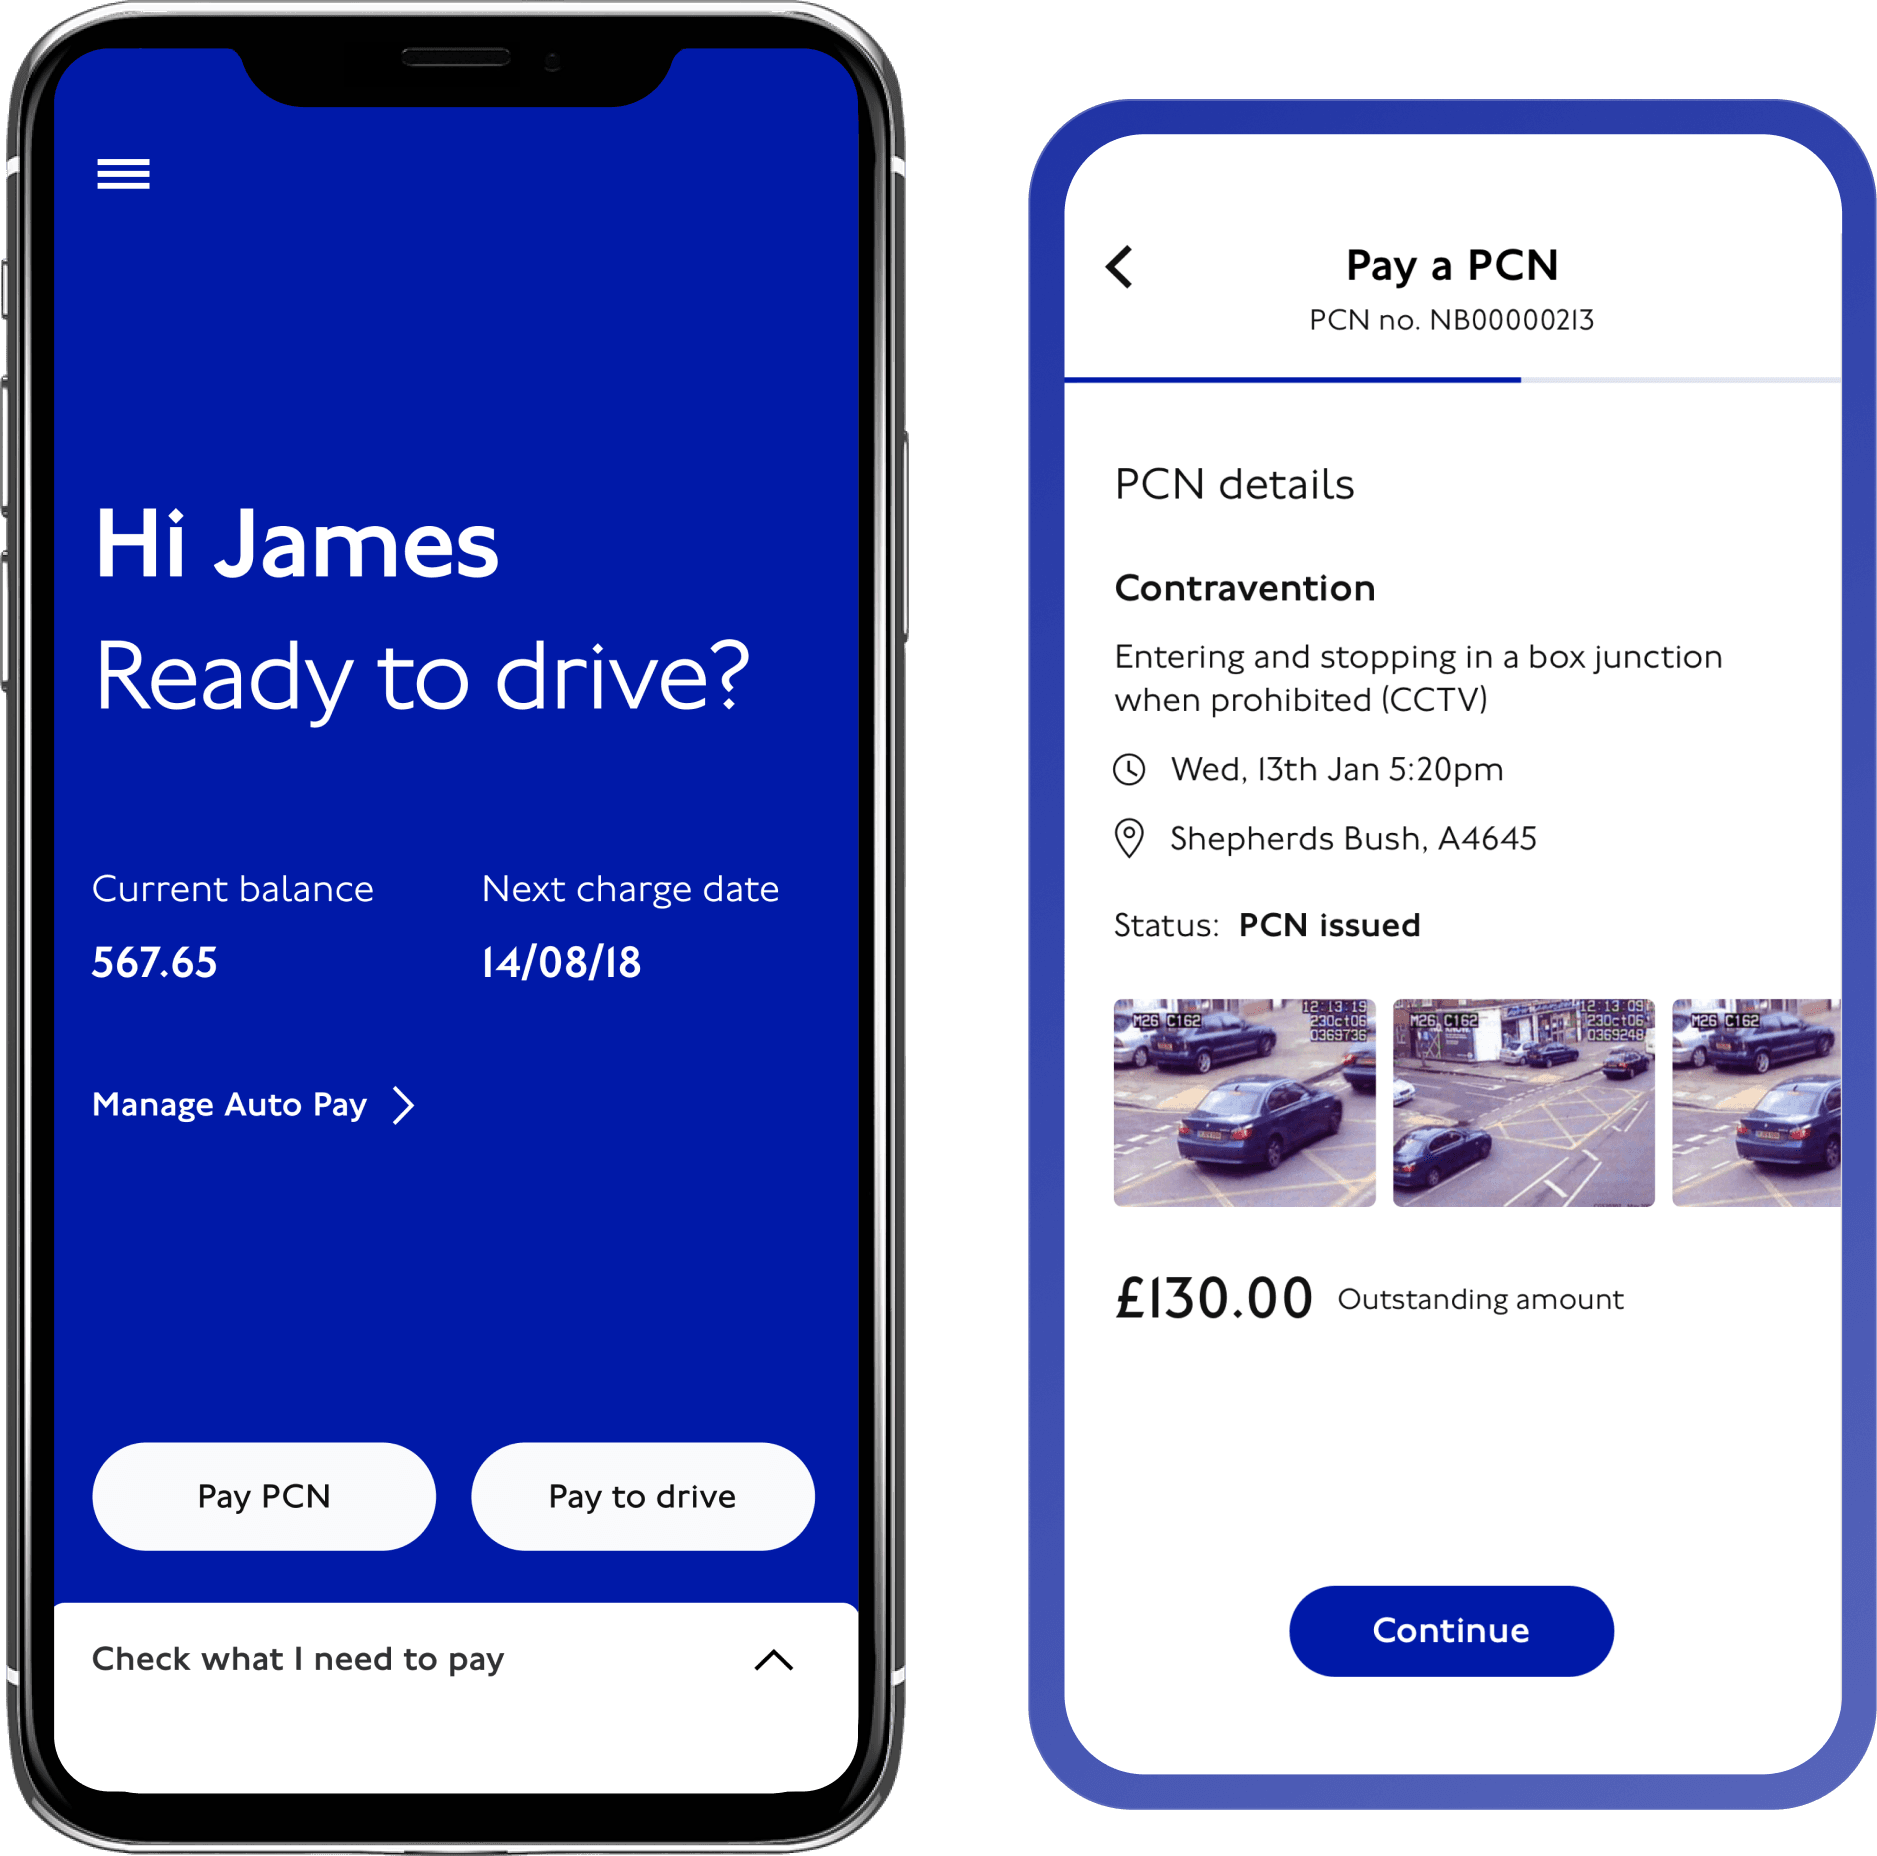 The TfL Pay to Drive in London app